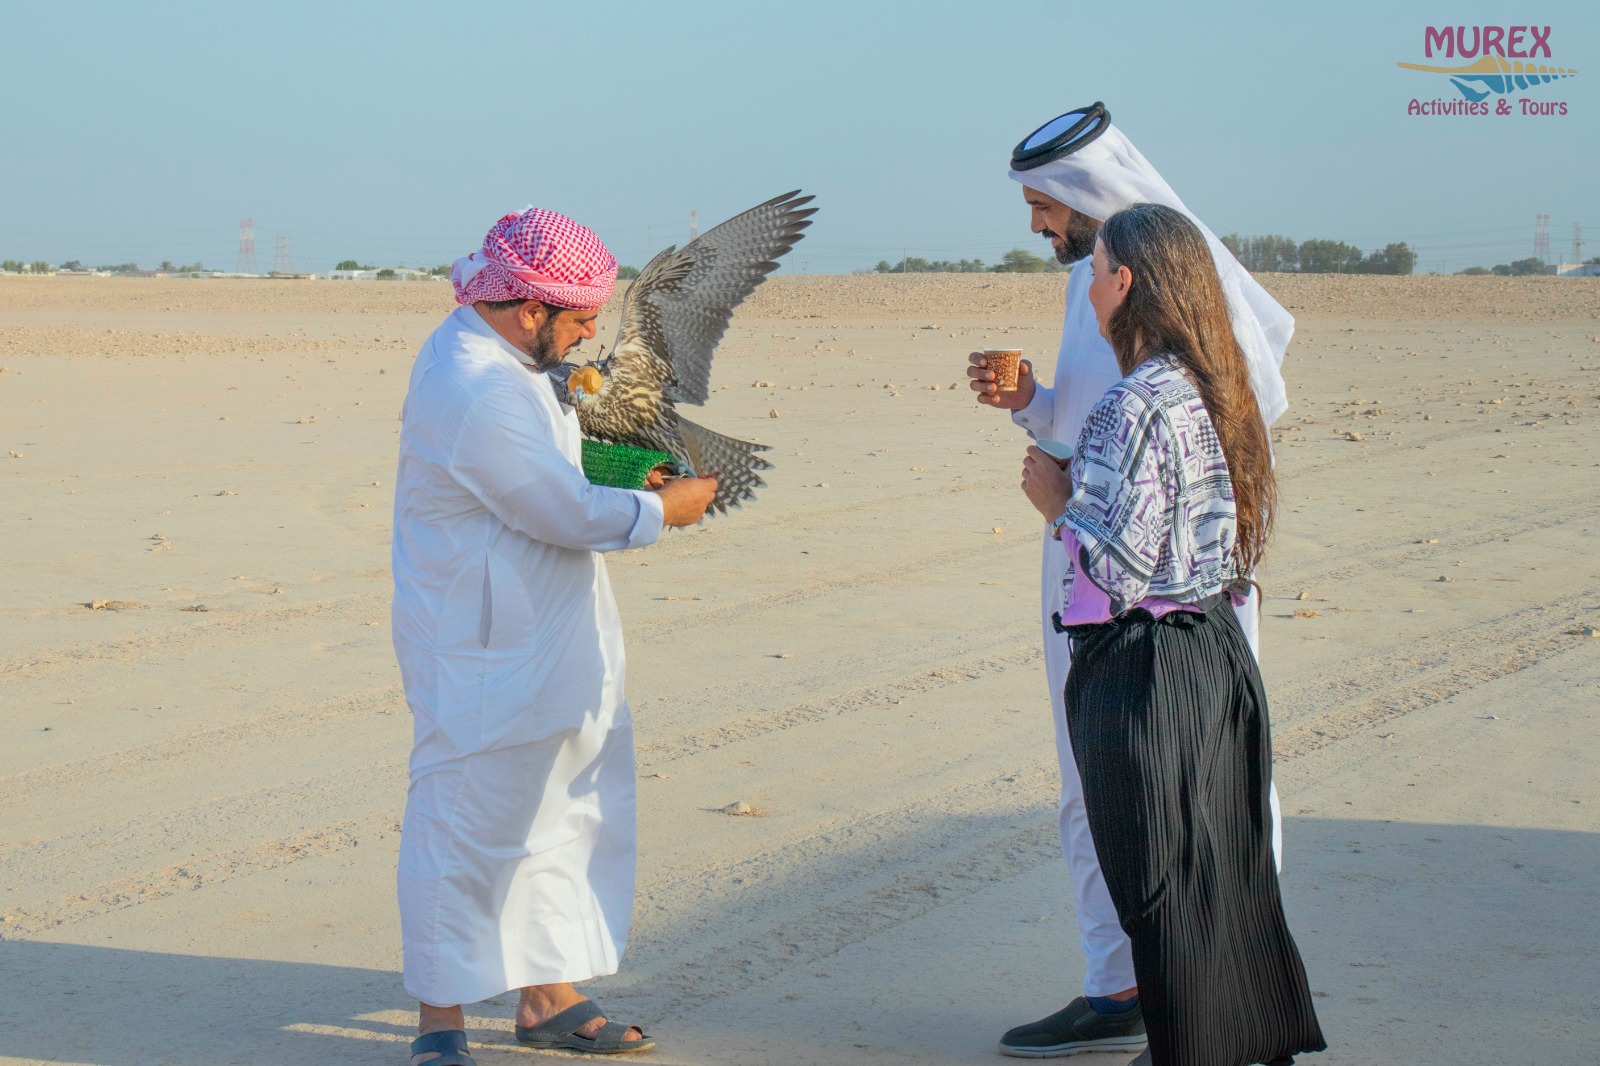 Falcon Experience in the Desert, learn about falcons